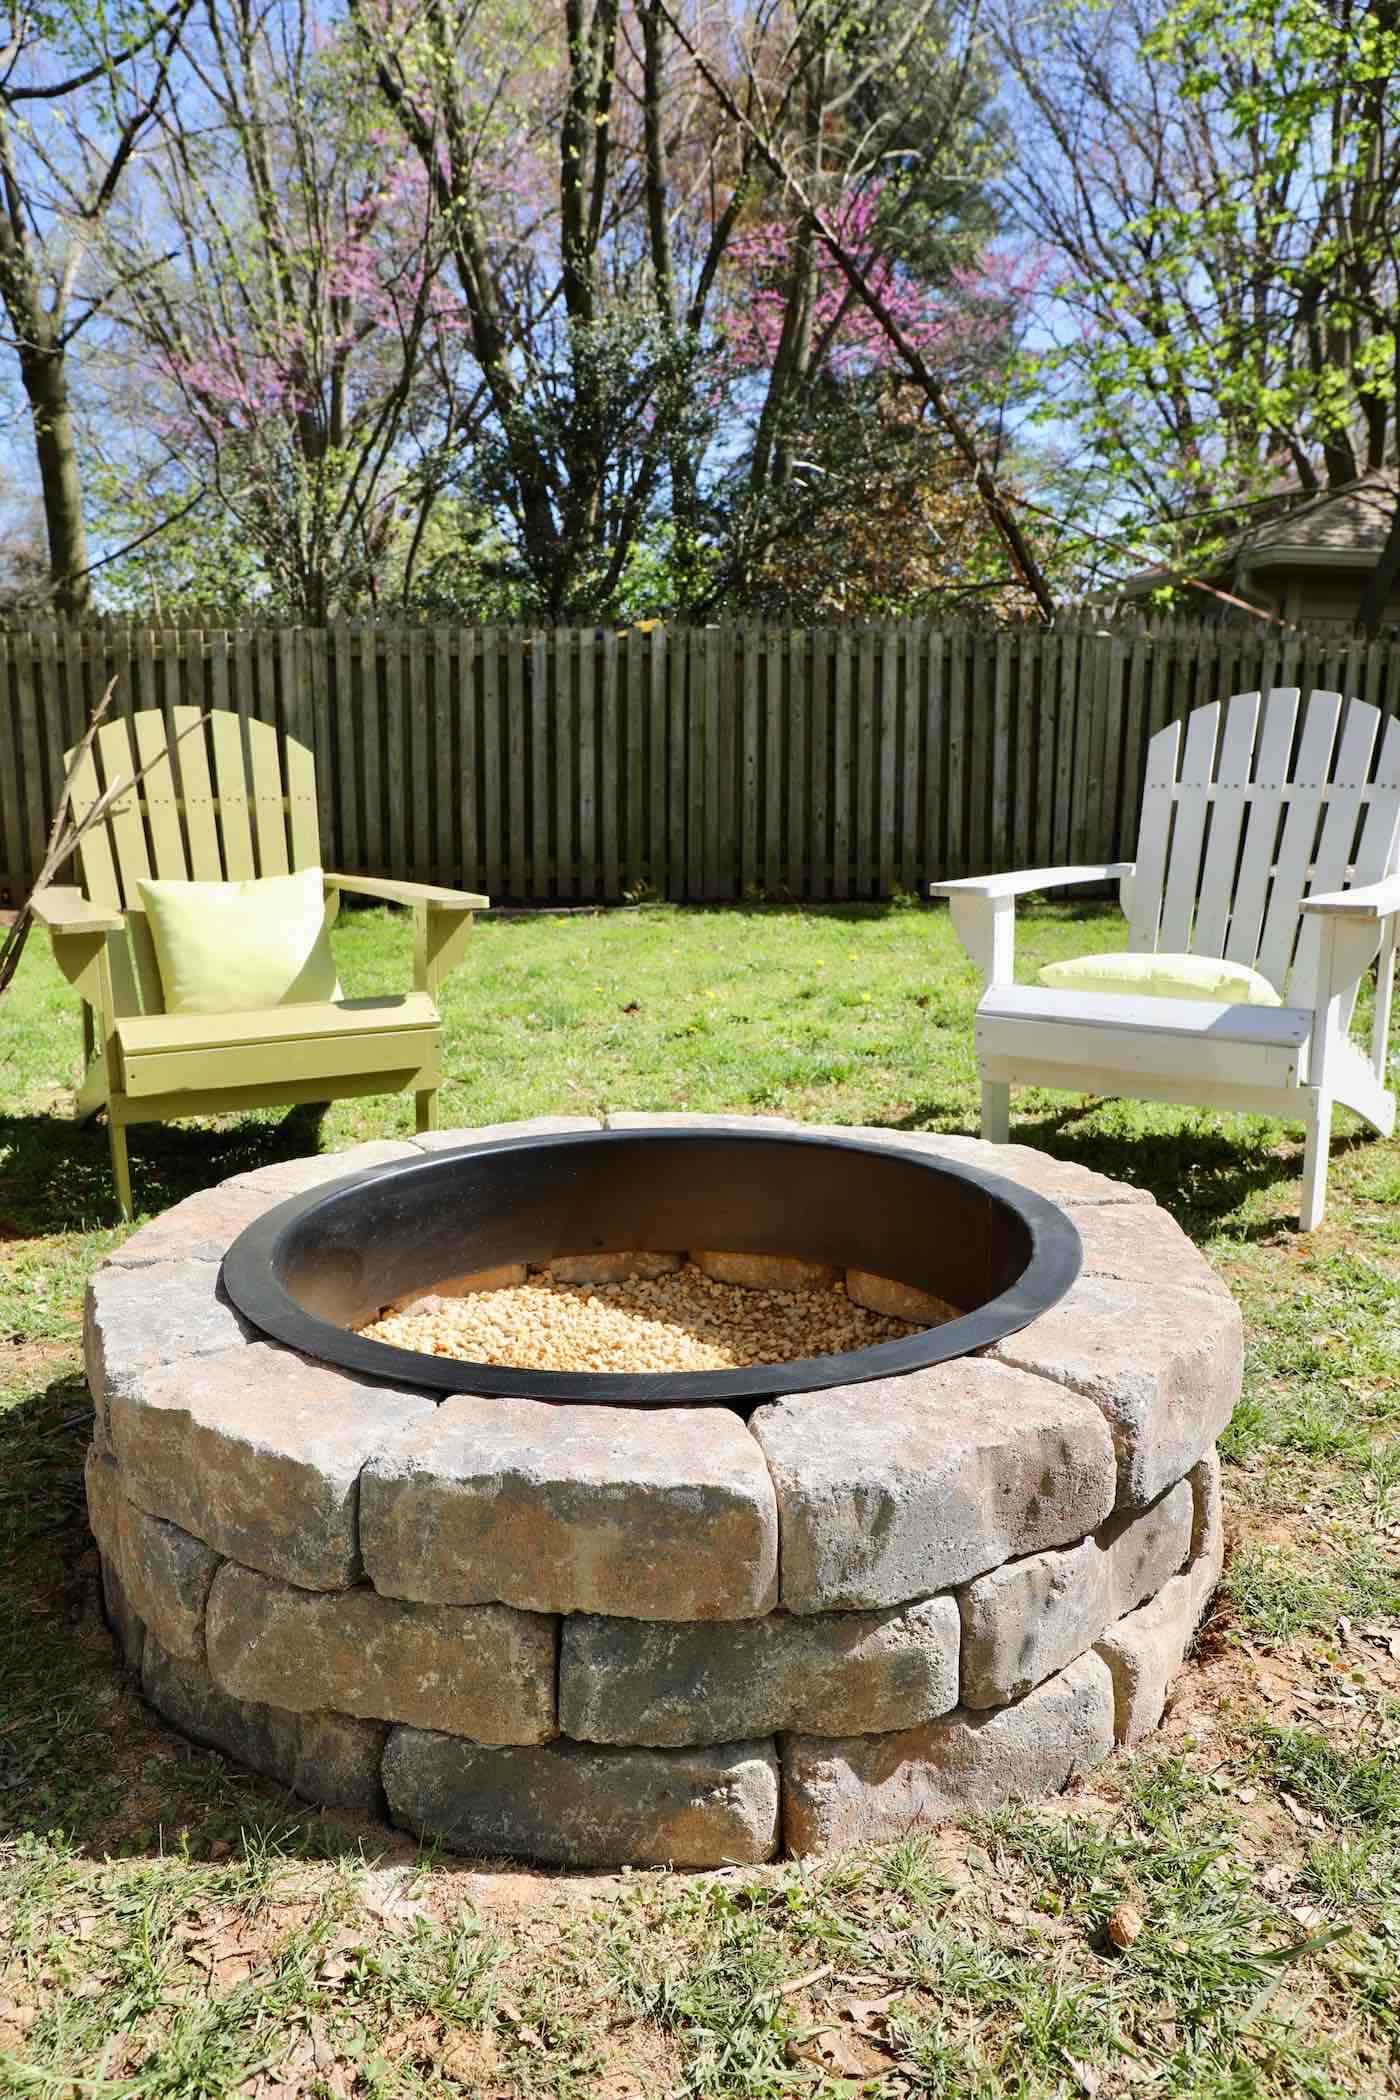 Diy Fire Pit With Gravel Stones, How To Build Rock Fire Pit